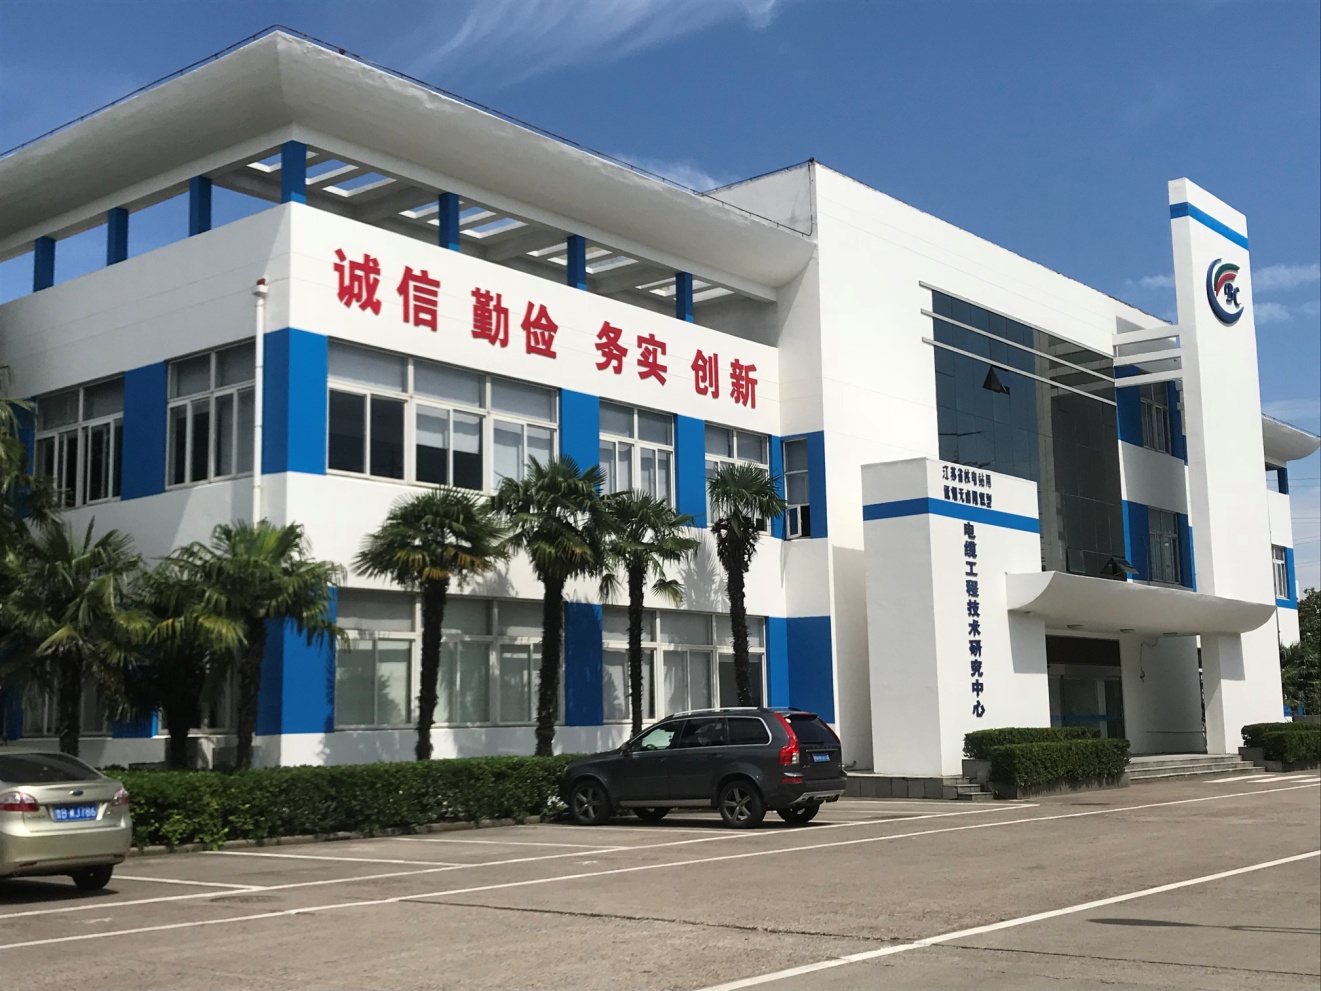 Changzhou Bayi Cable Co., Ltd. Five new products such as 1E class K1 full series and K3 power cables for Hualong No. 1 nuclear power plant successfully passed all third-party qualification tests